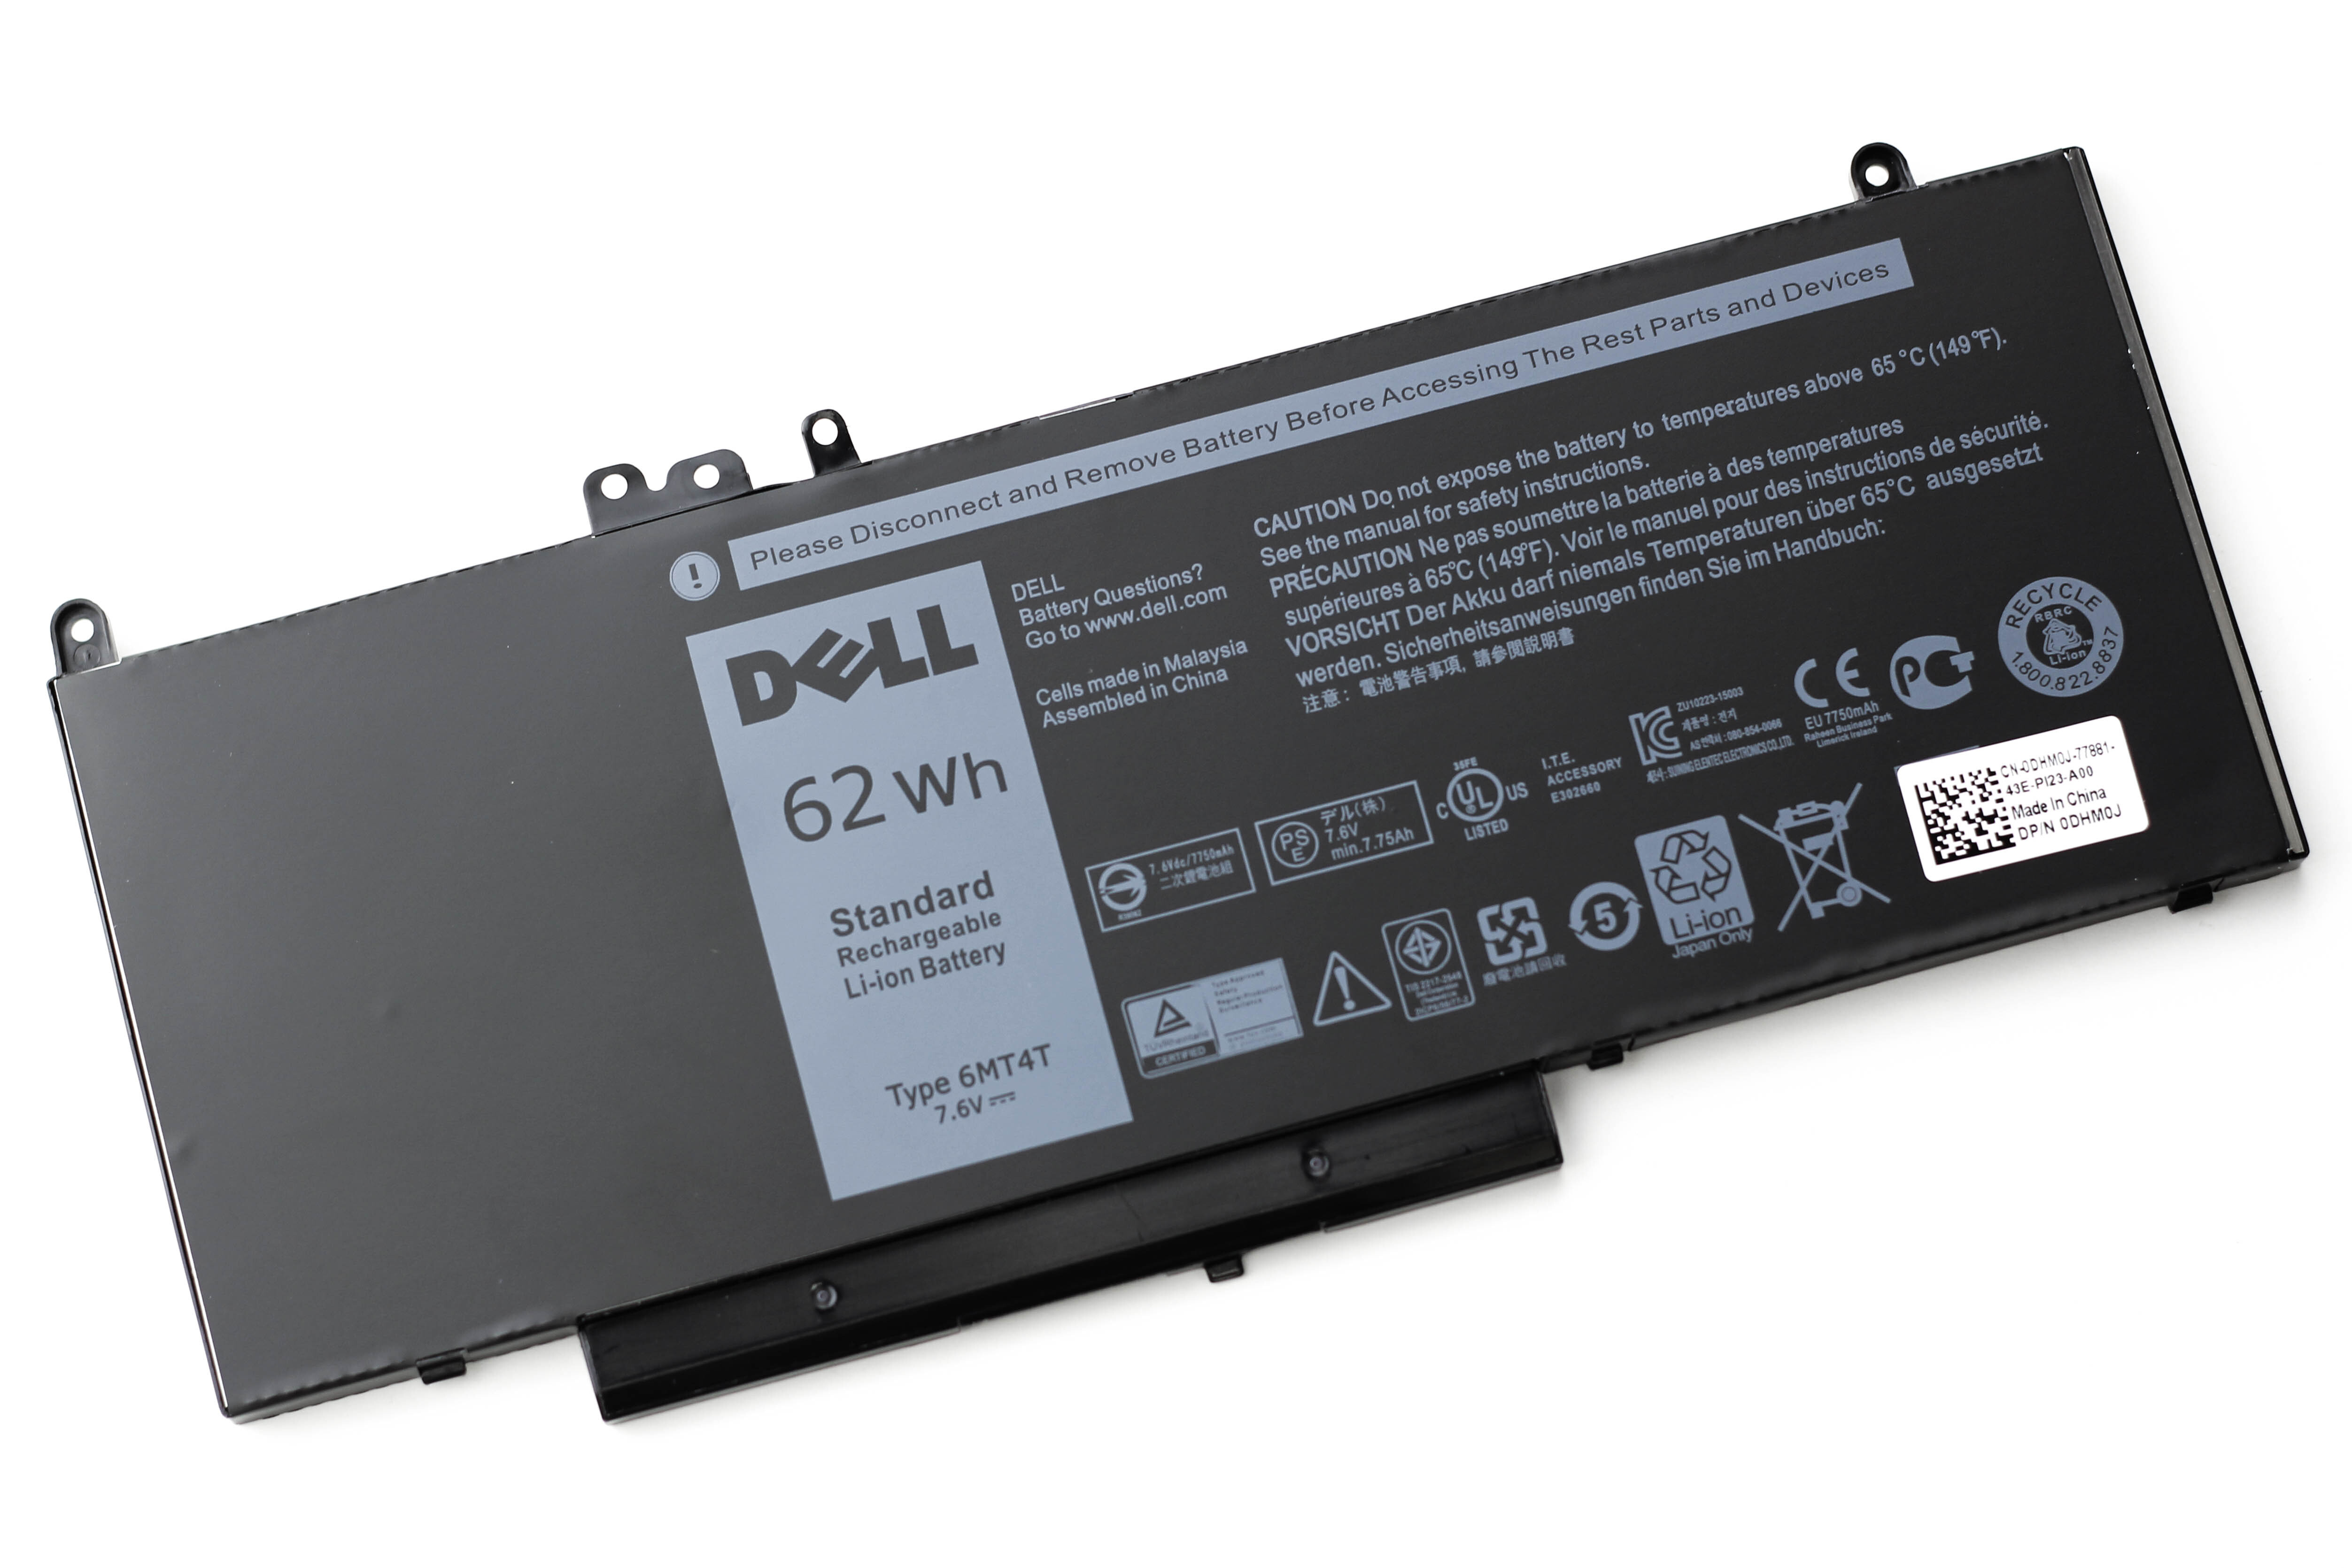 Dell battery. Dell 6mt4t аккумулятор. Dell 33ydh аккумулятор. Аккумулятор dell 5414. Аккумулятор dell 5400.